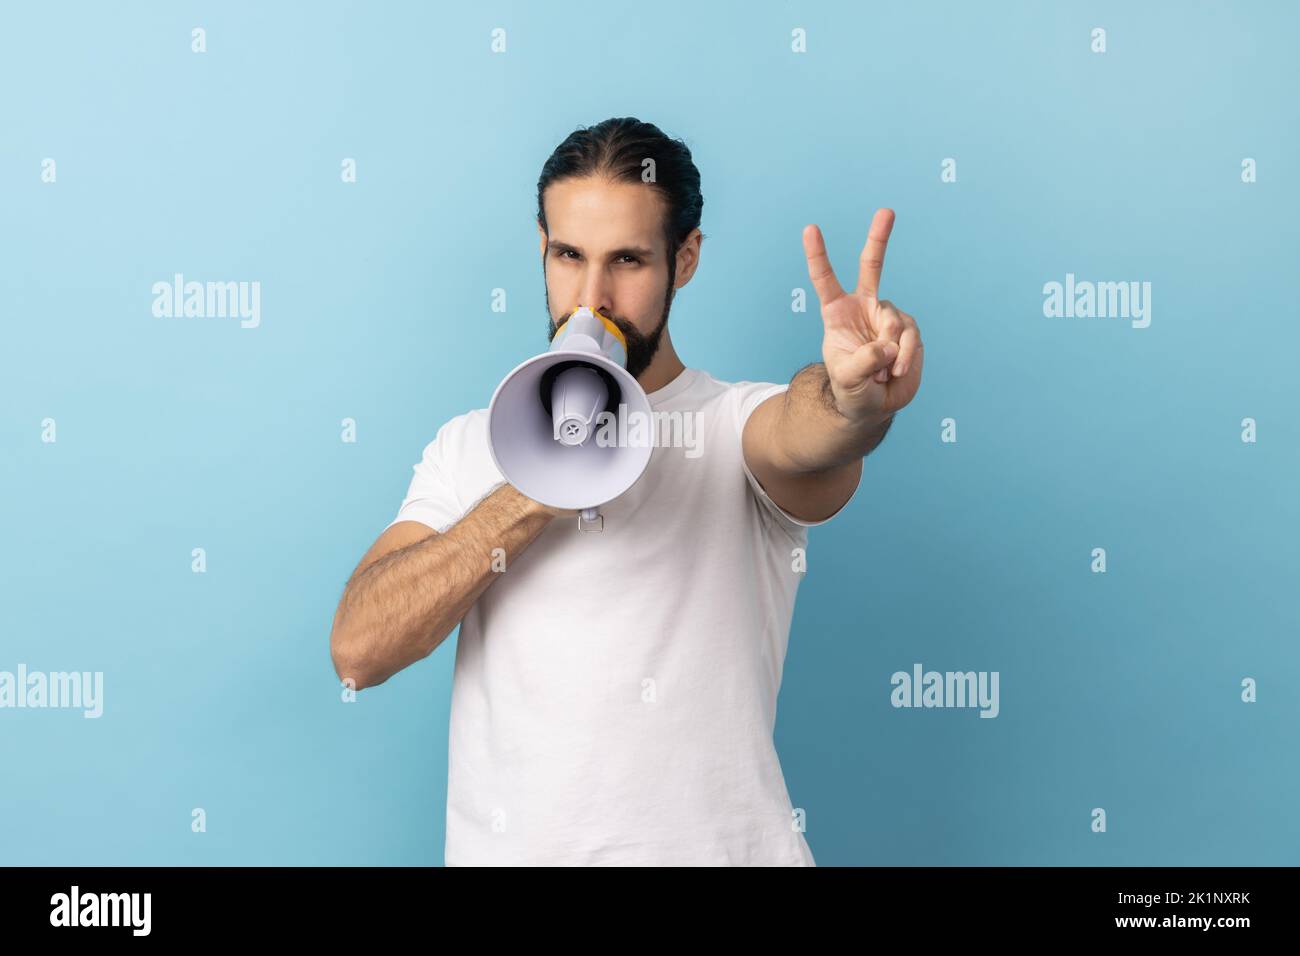 Portrait of handsome man with beard wearing white T-shirt holding megaphone in hands and making announcement, showing v sign to camera. Indoor studio shot isolated on blue background. Stock Photo